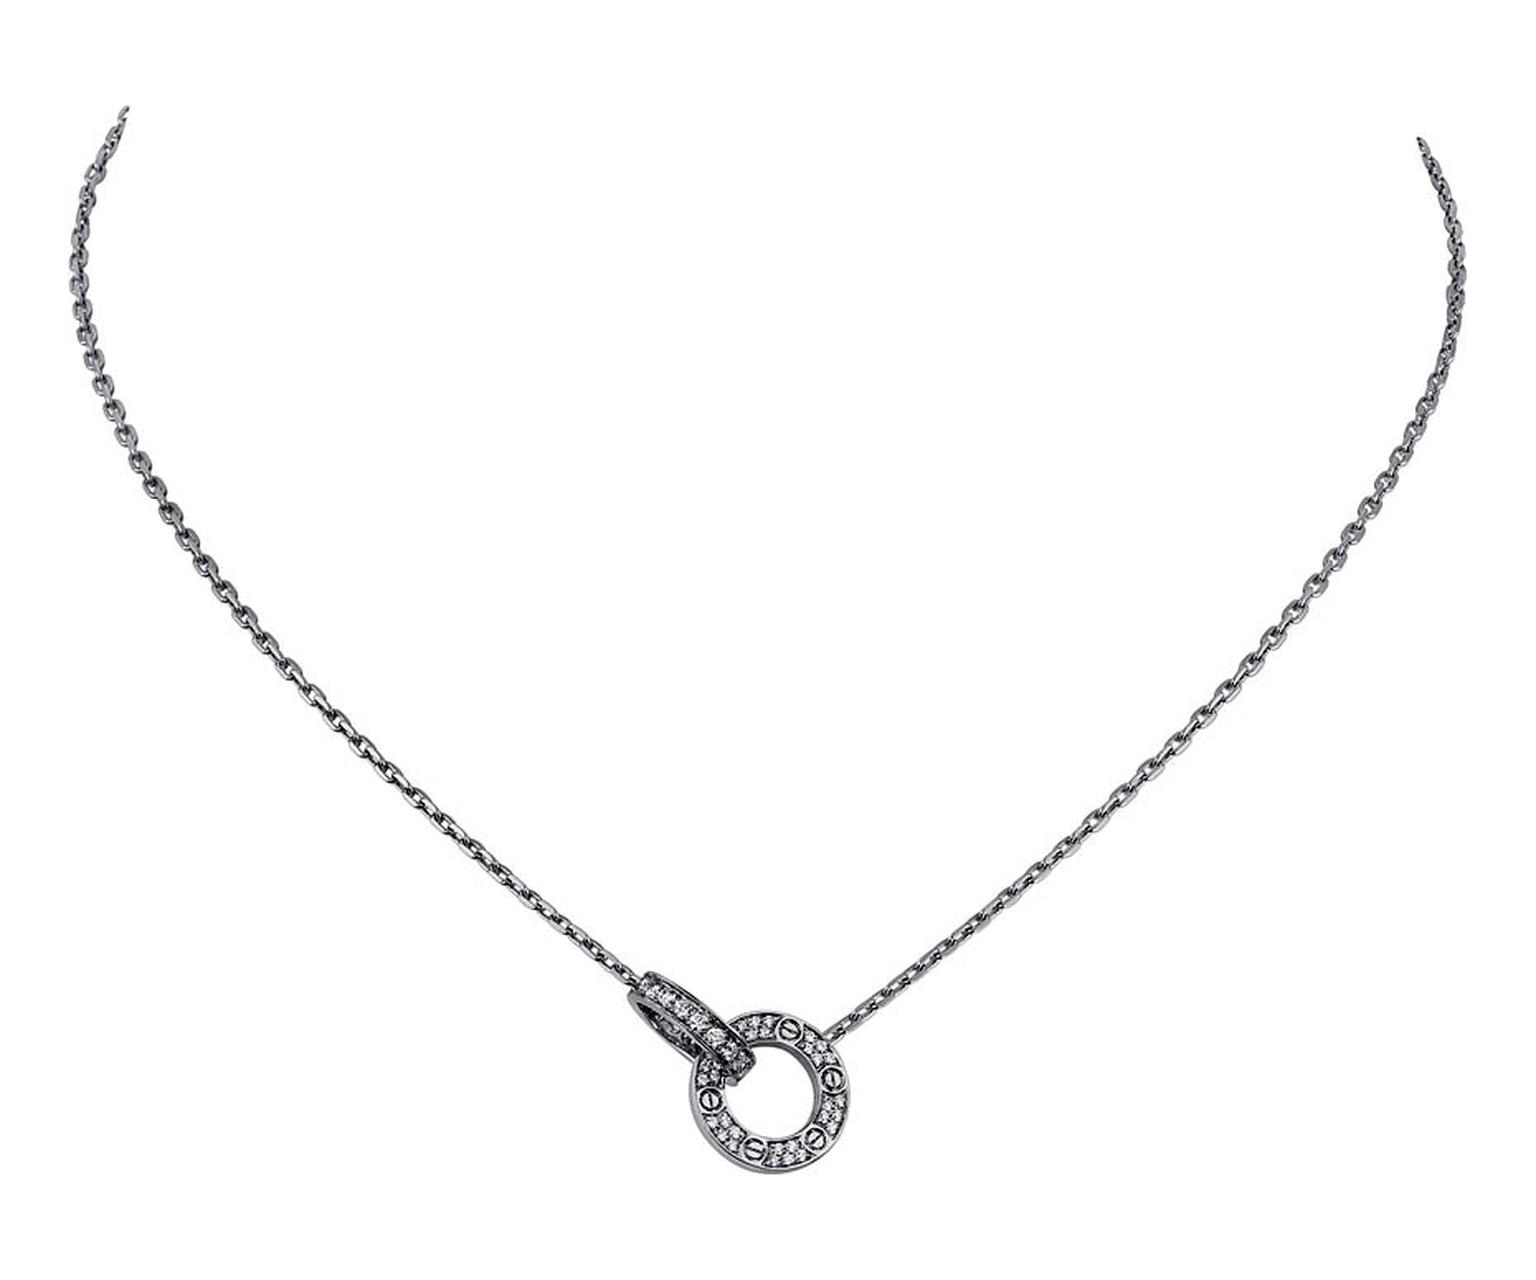 Rich in symbolic appeal is the Cartier Love necklace with interlocking diamond-set rings.